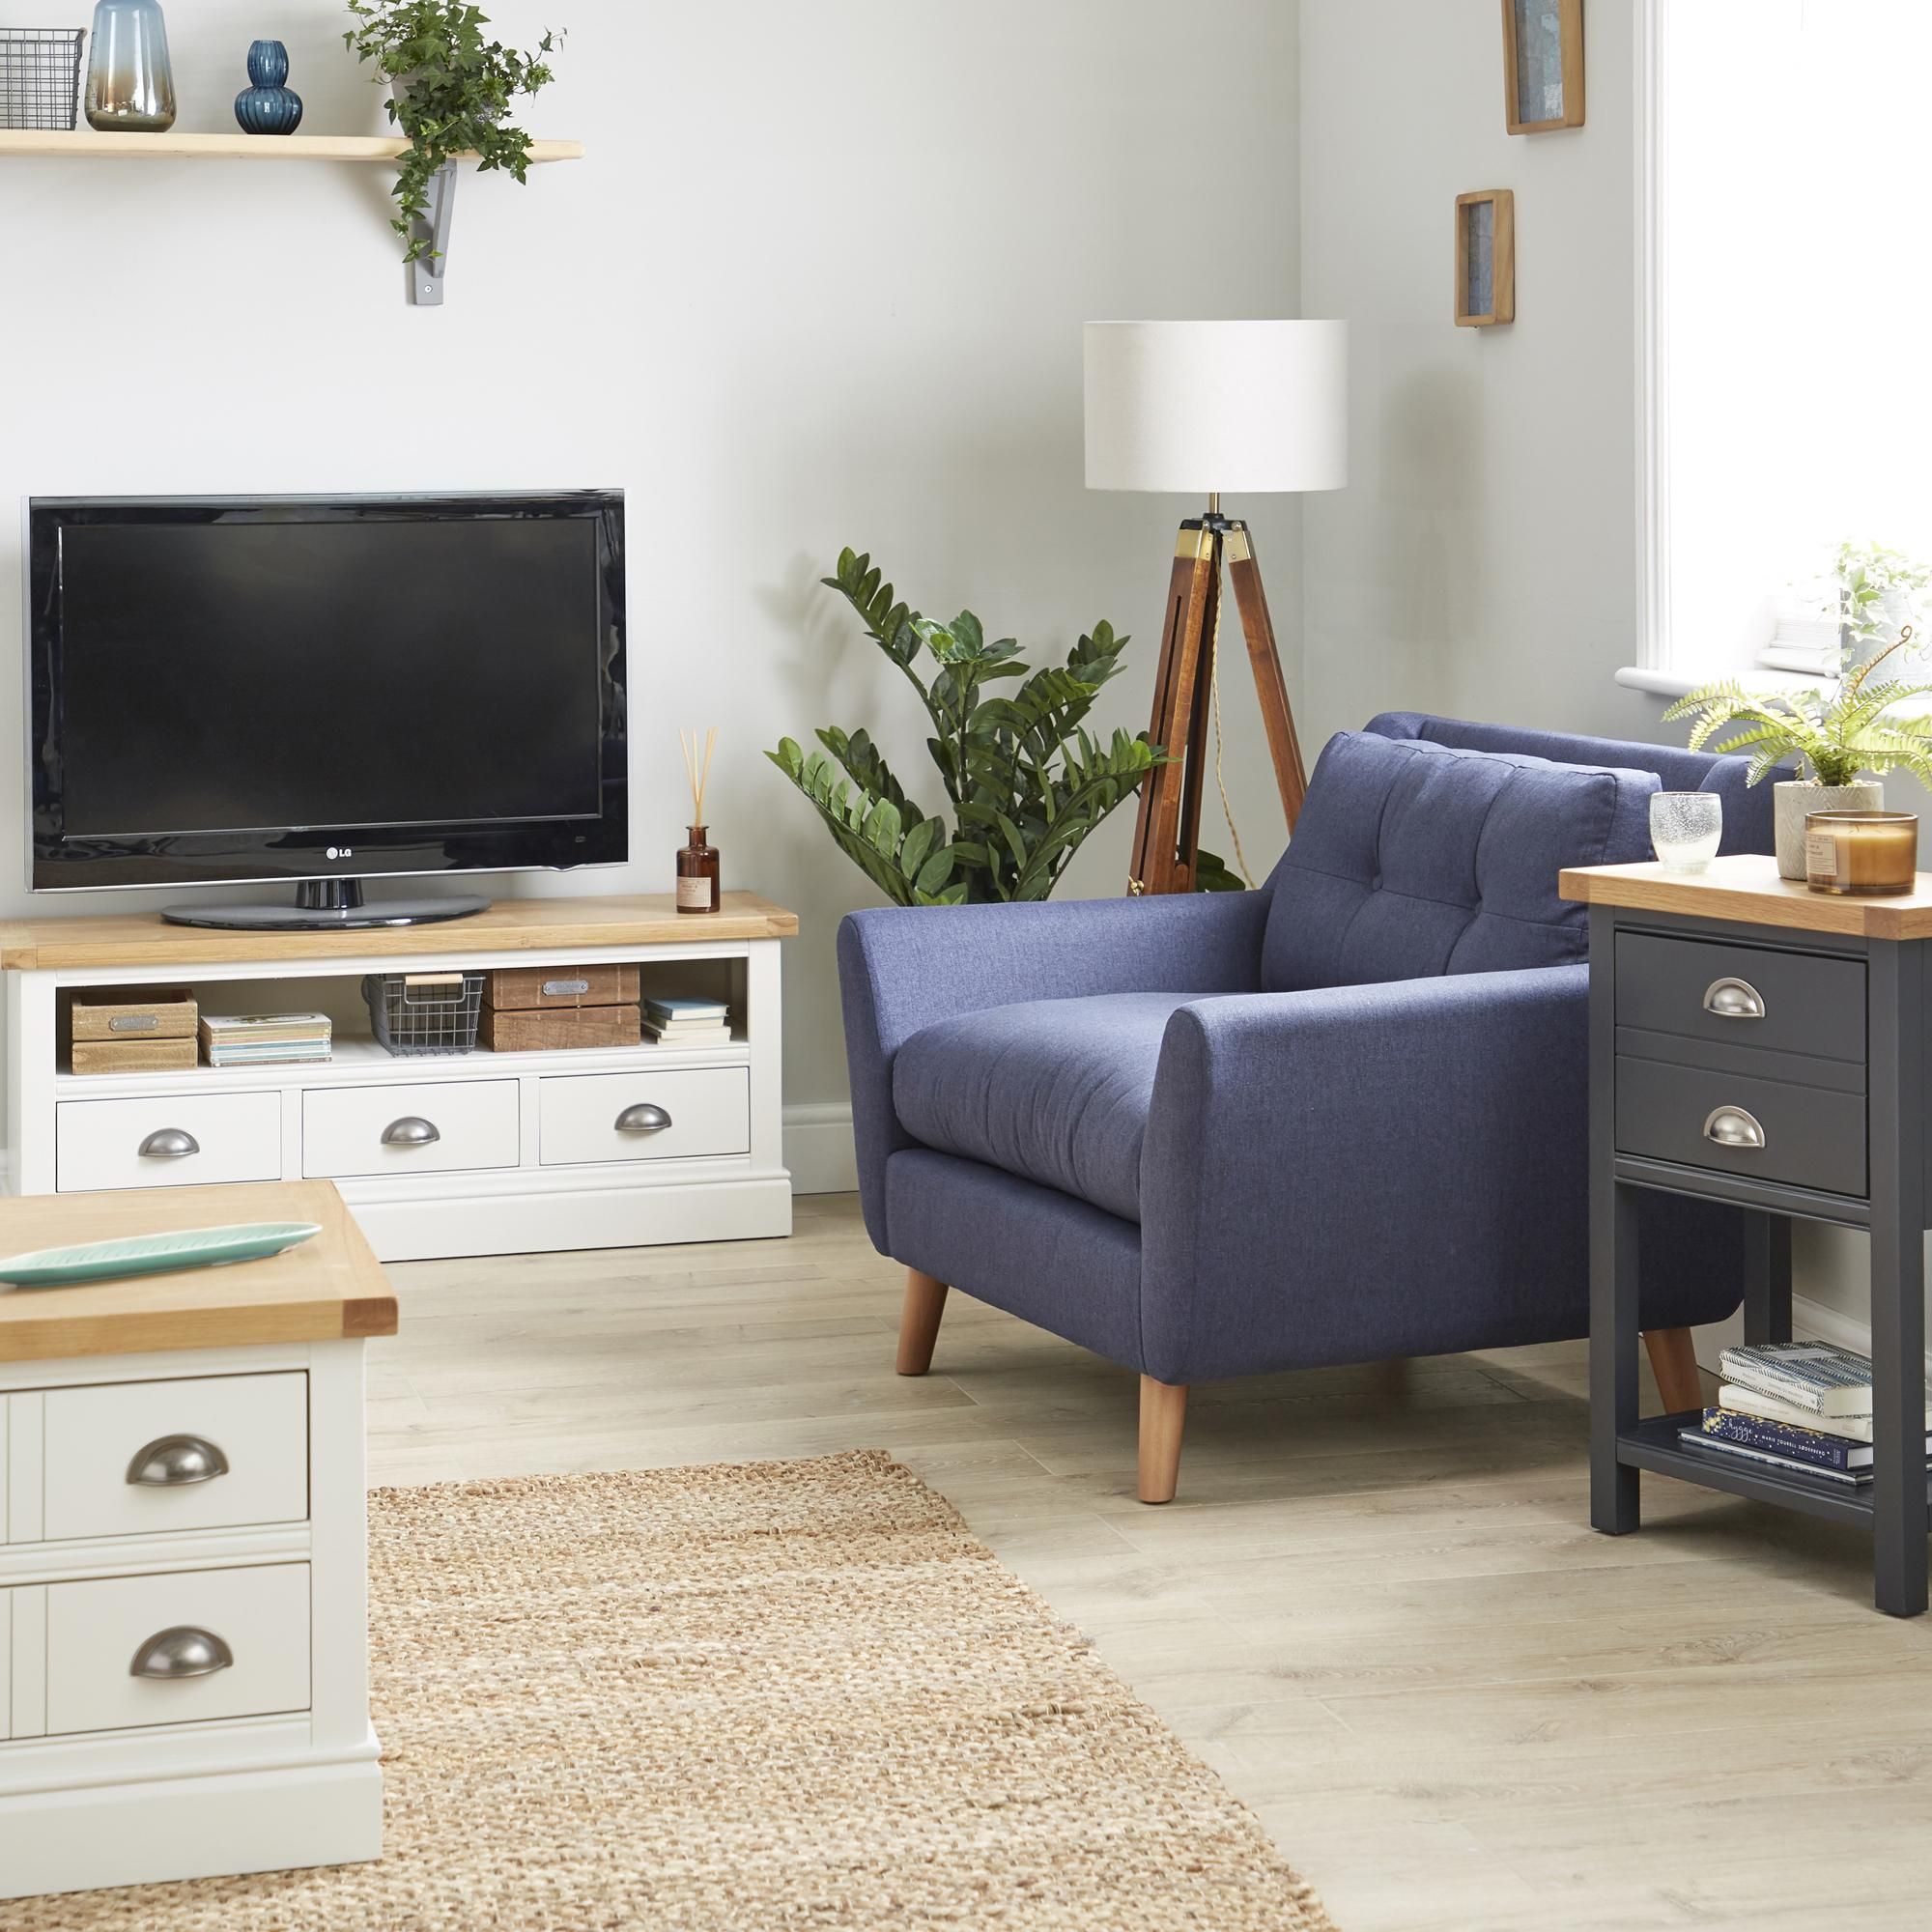 Compton Ivory Corner Tv Stand | Living Room Furniture Throughout Compton Ivory Large Tv Stands (View 4 of 15)